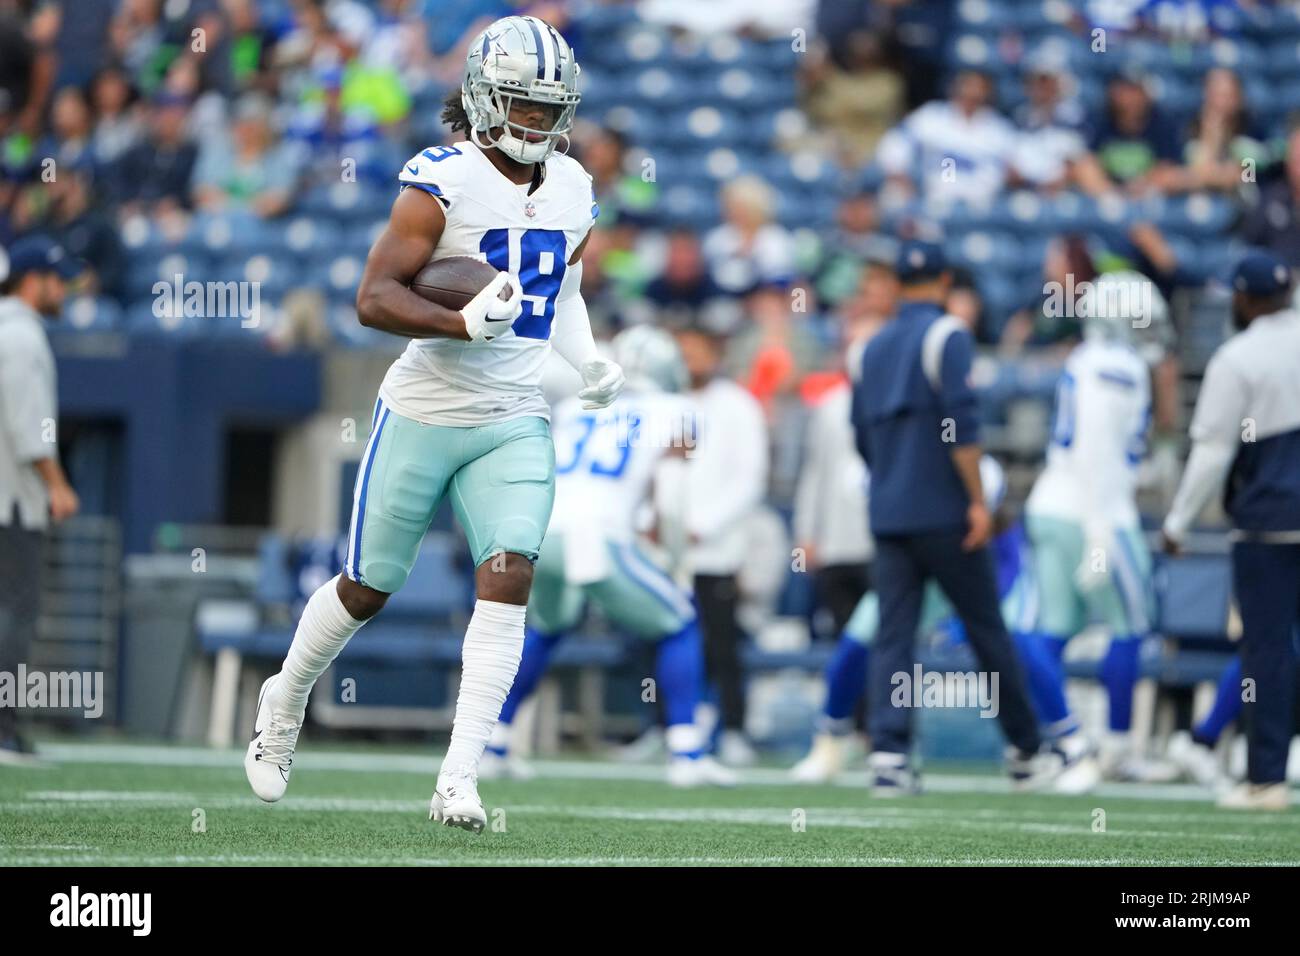 ARLINGTON, TX - AUGUST 26: Dallas Cowboys wide receiver Dontario Drummond  (19) during warm-ups before the game between the Dallas Cowboys and the  Seattle Seahawks on August 26, 2022 at AT&T Stadium